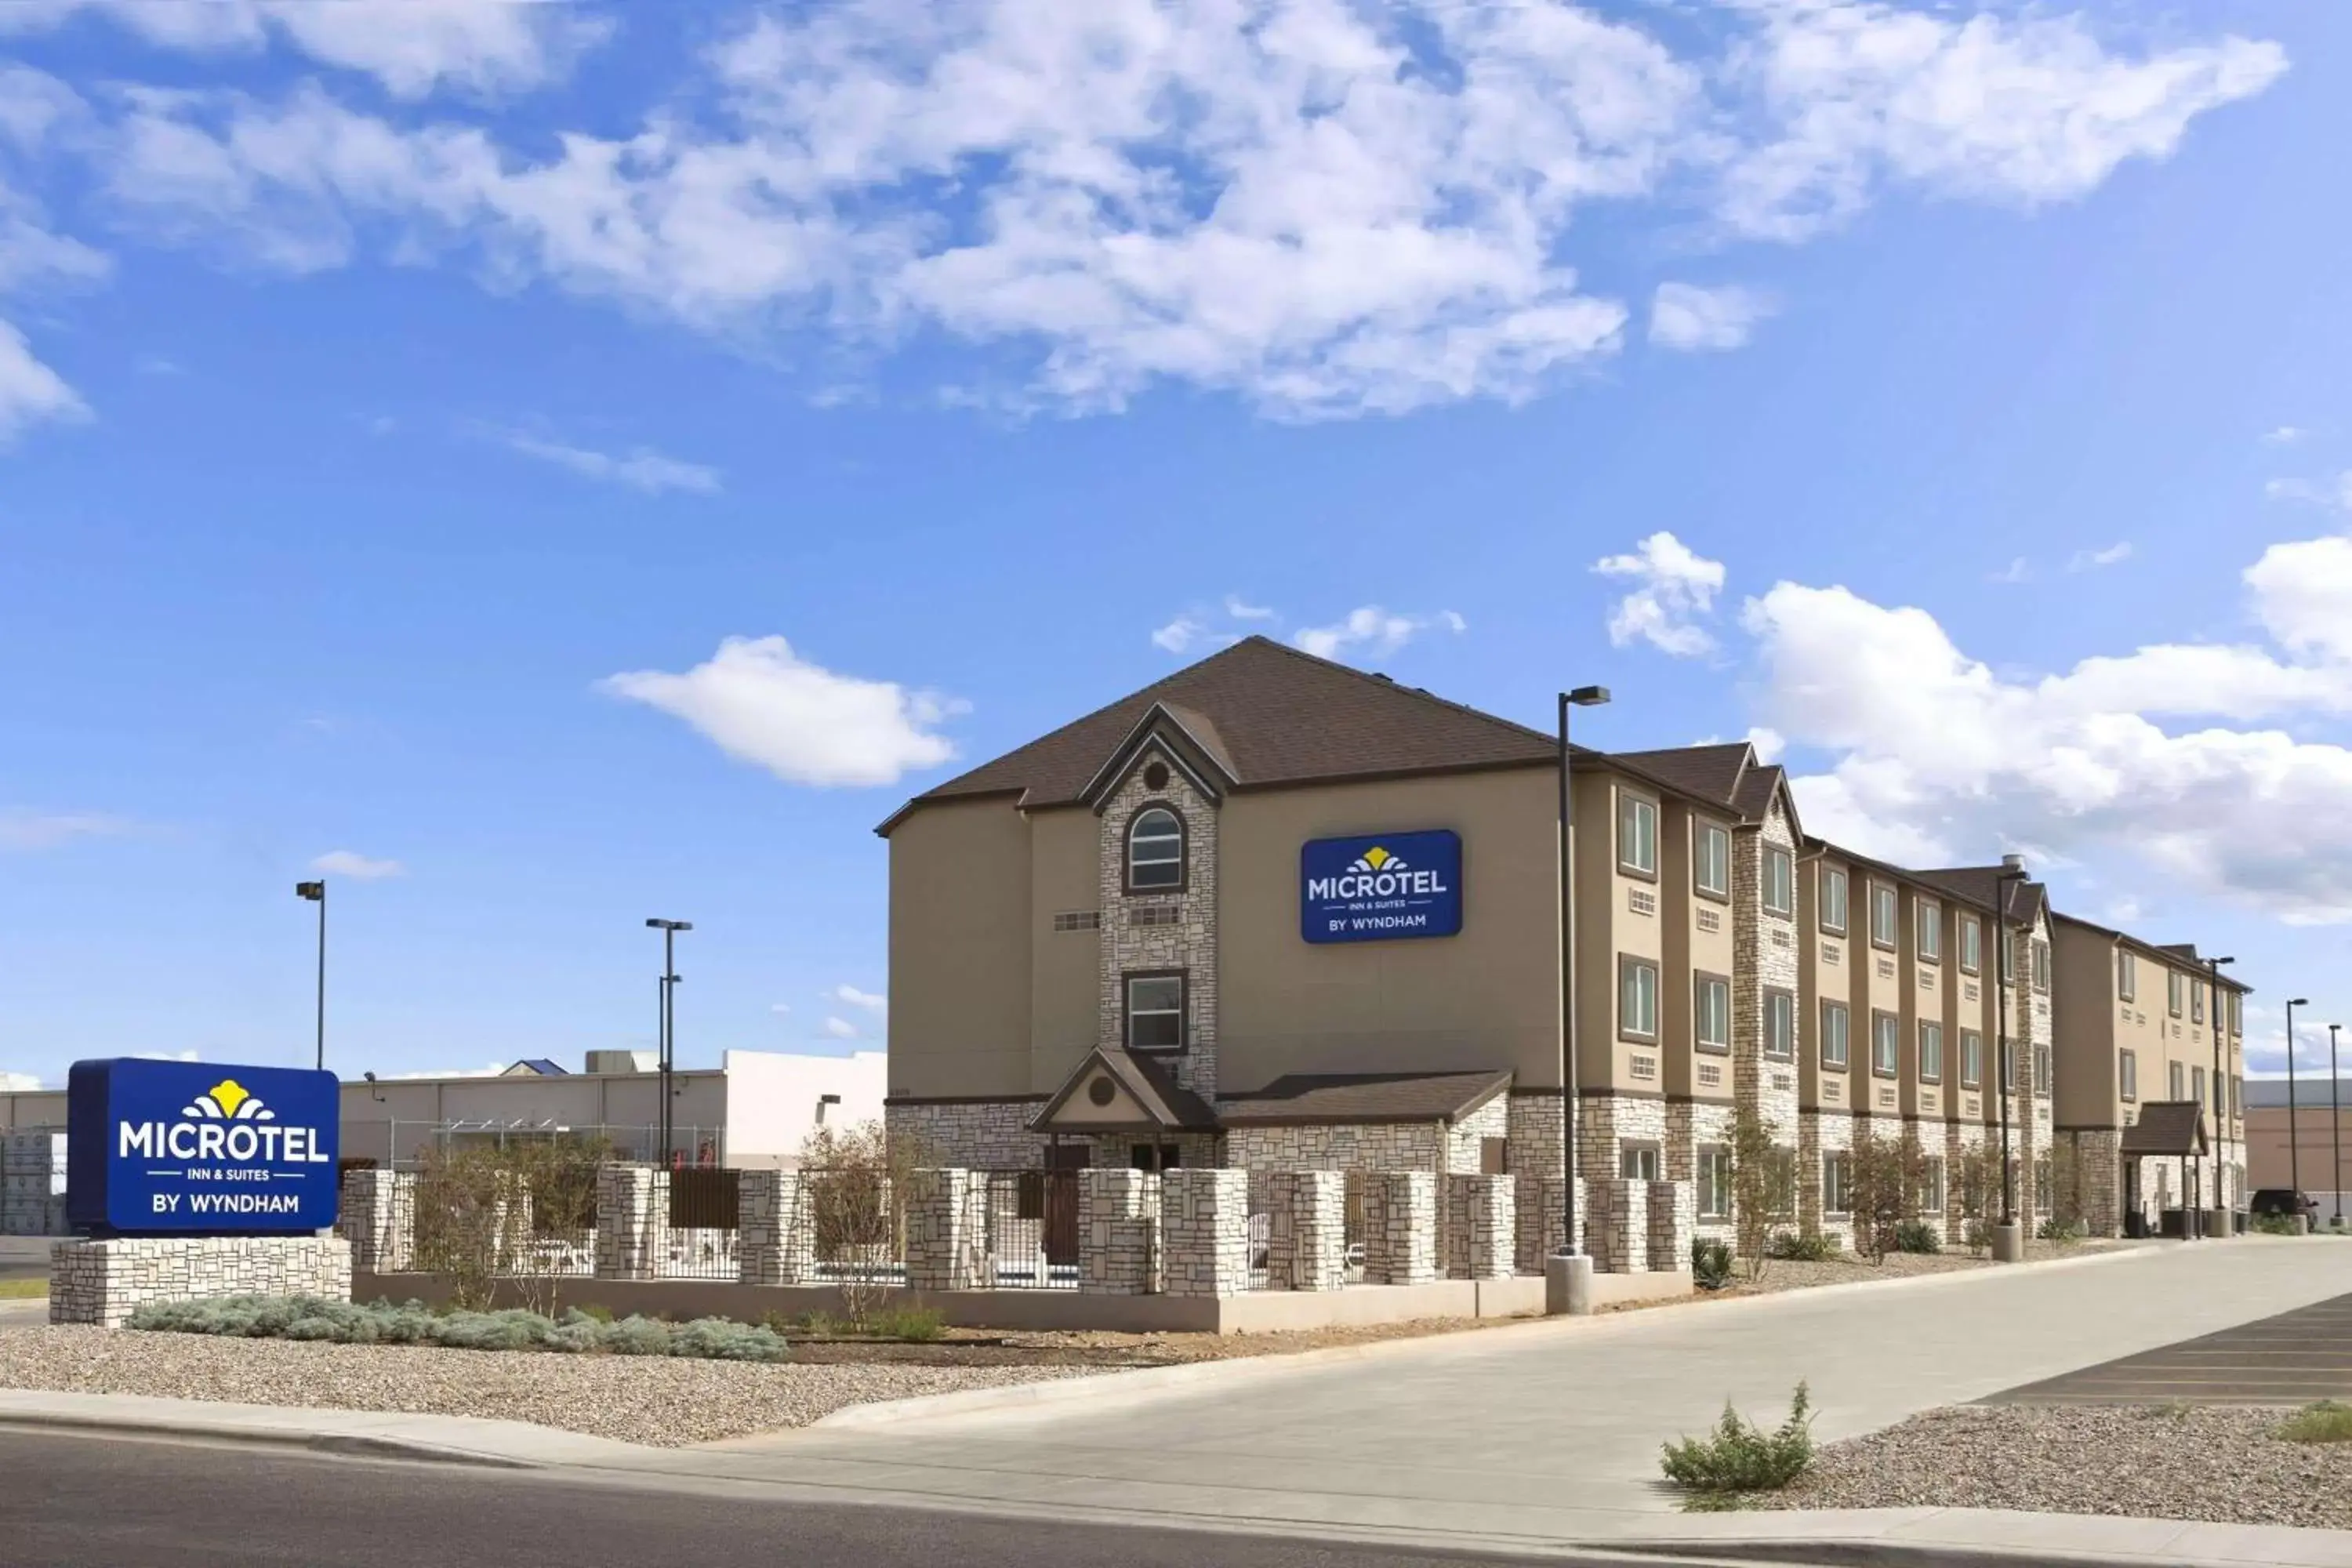 Property Building in Microtel Inn & Suites by Wyndham Odessa TX